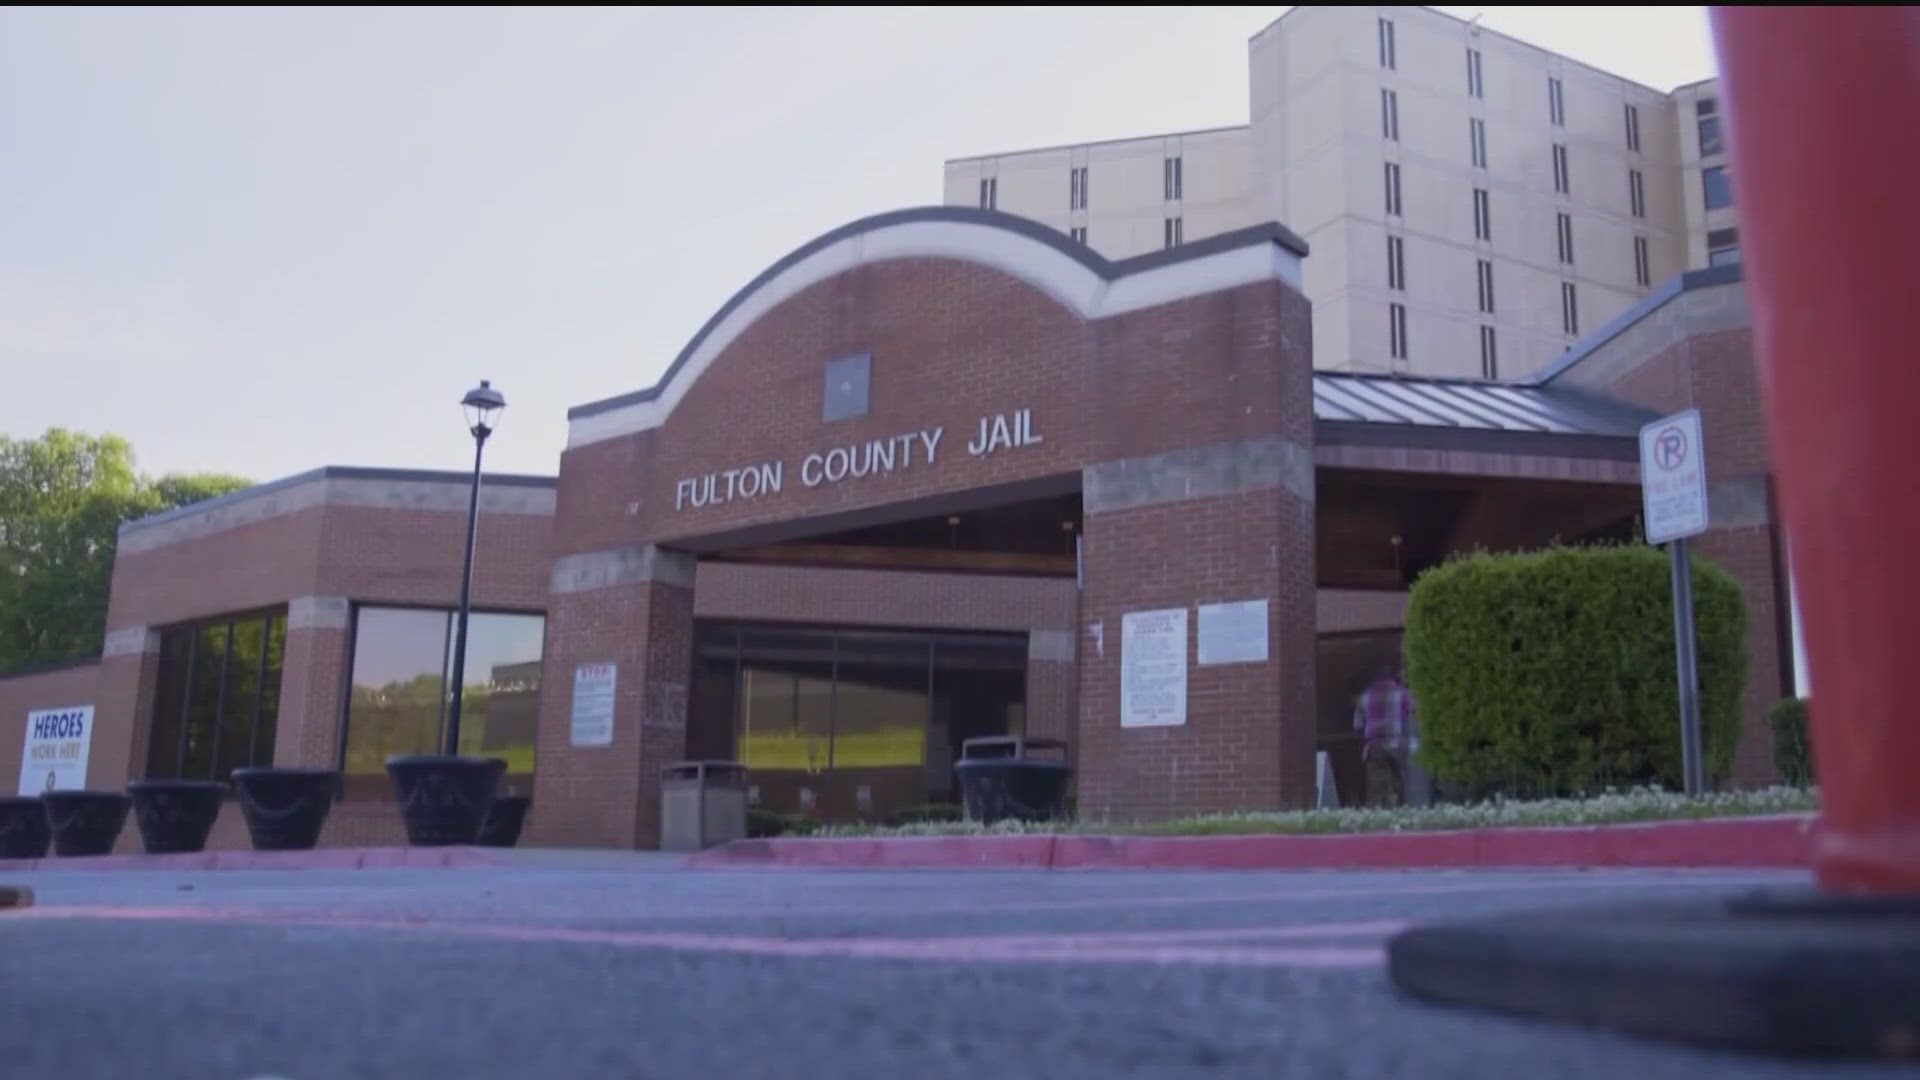 11Alive obtained several incident reports that provide more insight into the persisting issues at the jail.